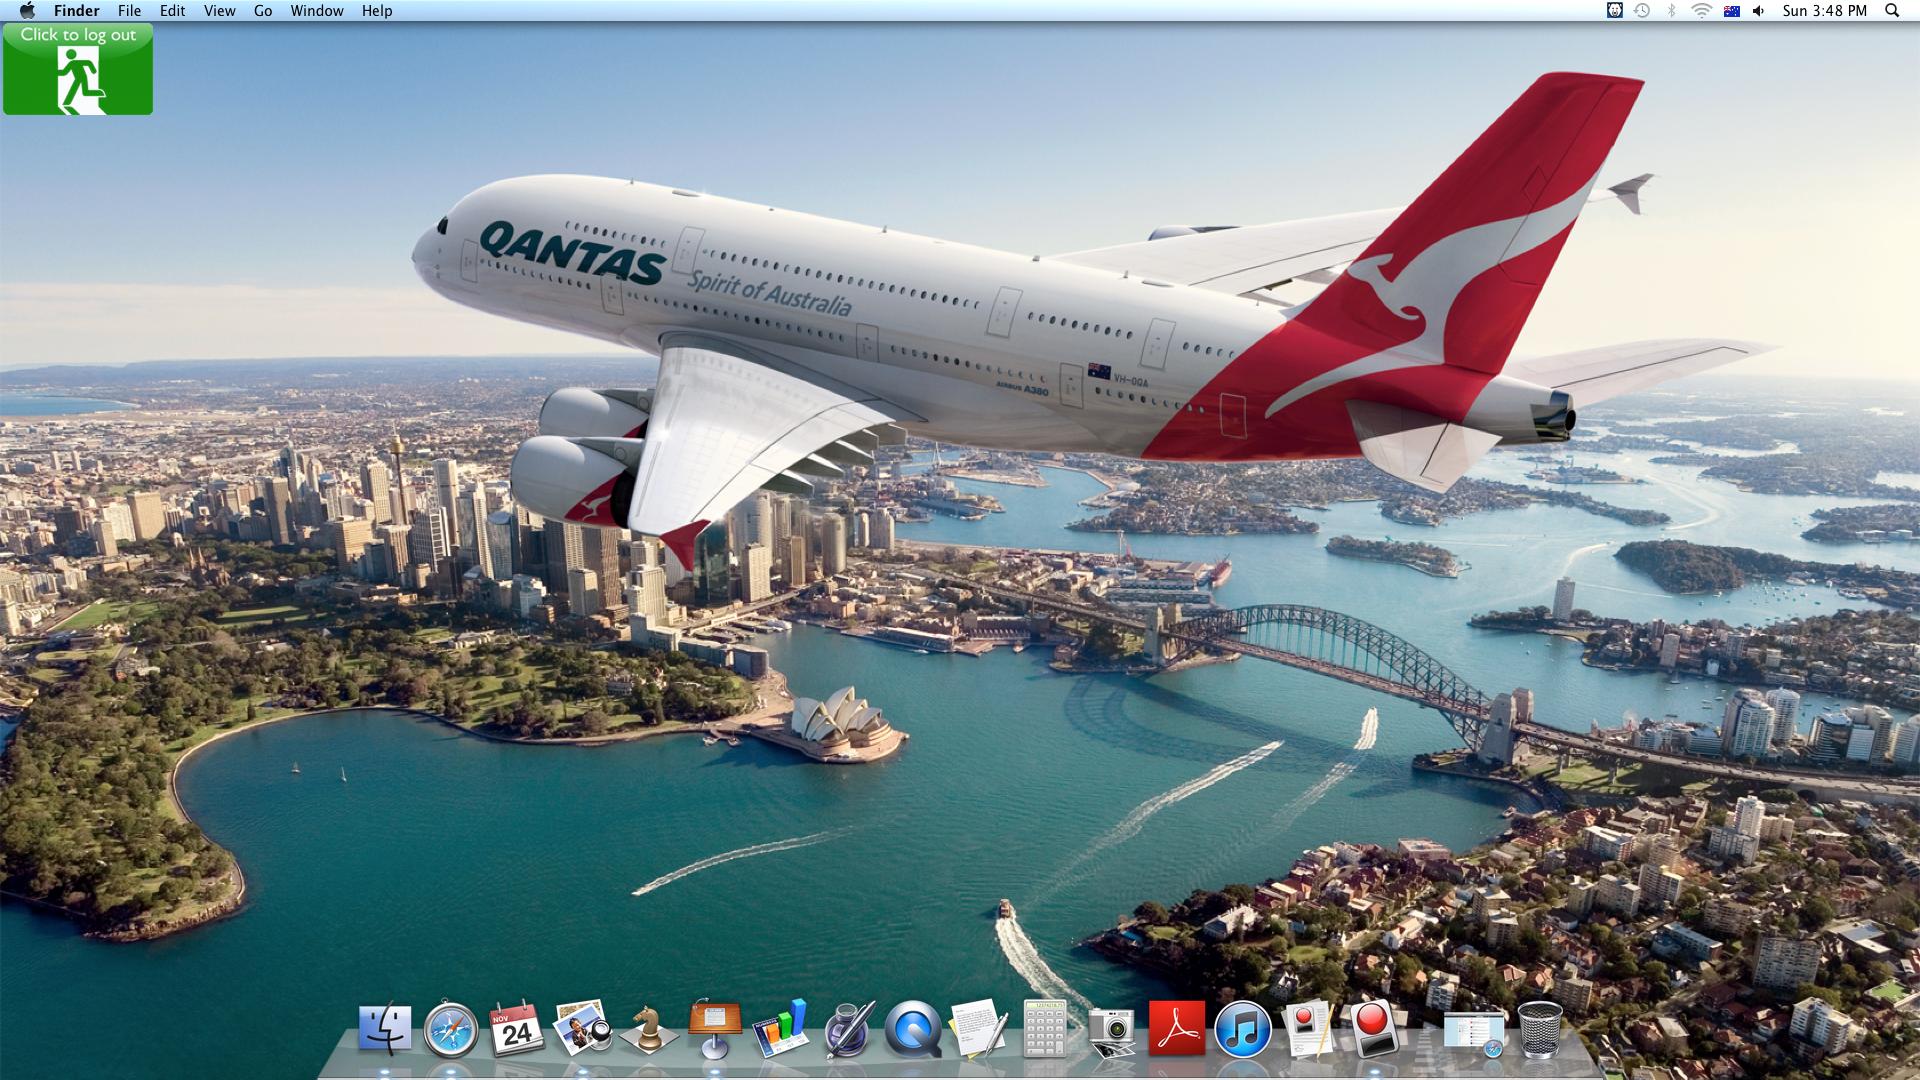 The Default Wallpaper On Puters In Qantas Club Is